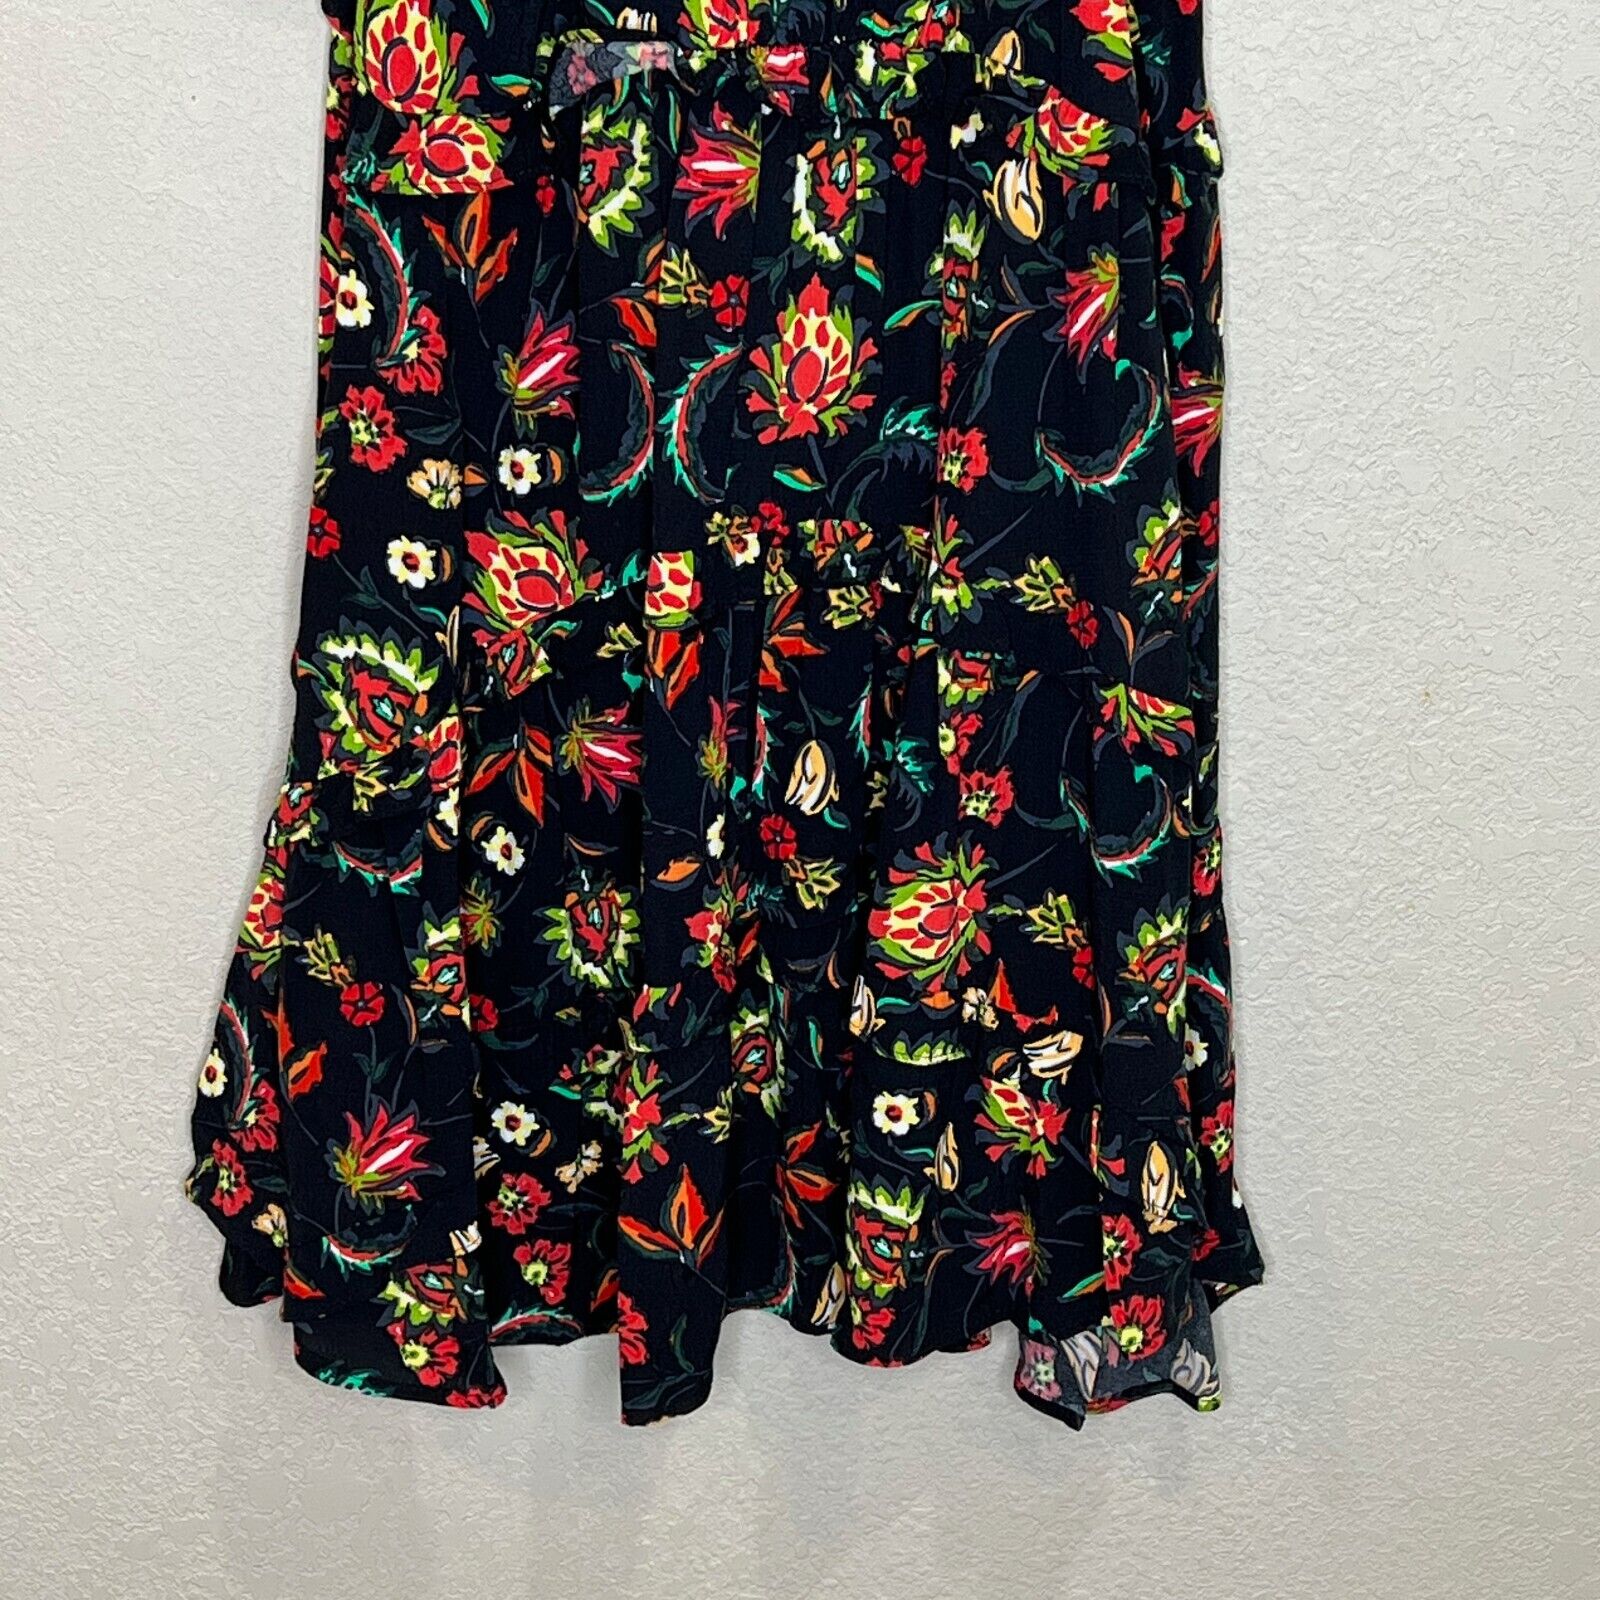 by Anthropologie Robin Tiered Black Paisley V Neck Ruffle Dress XS